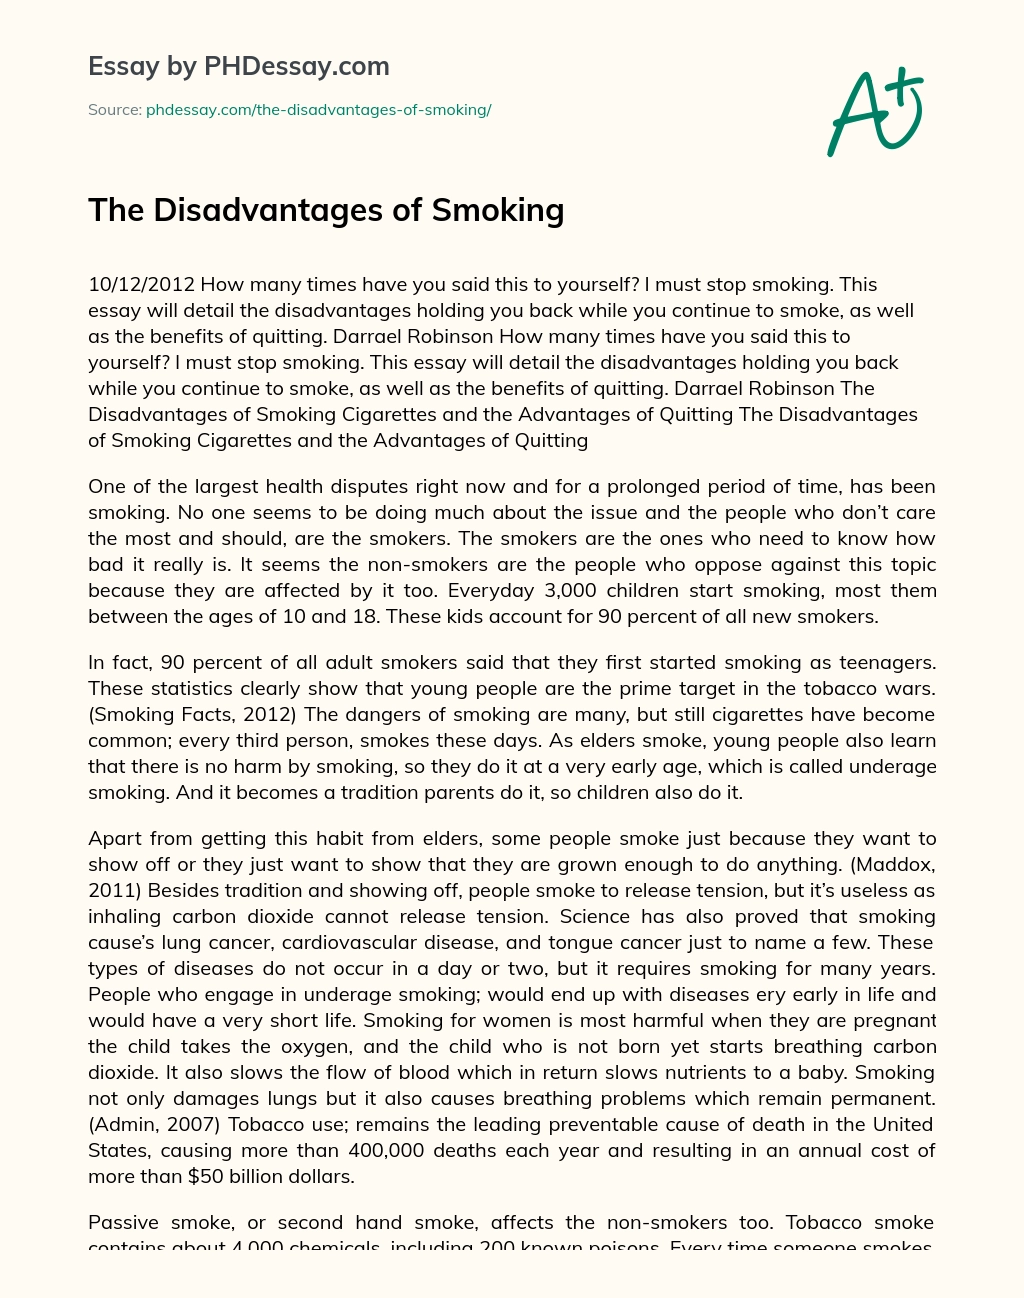 The Disadvantages of Smoking essay